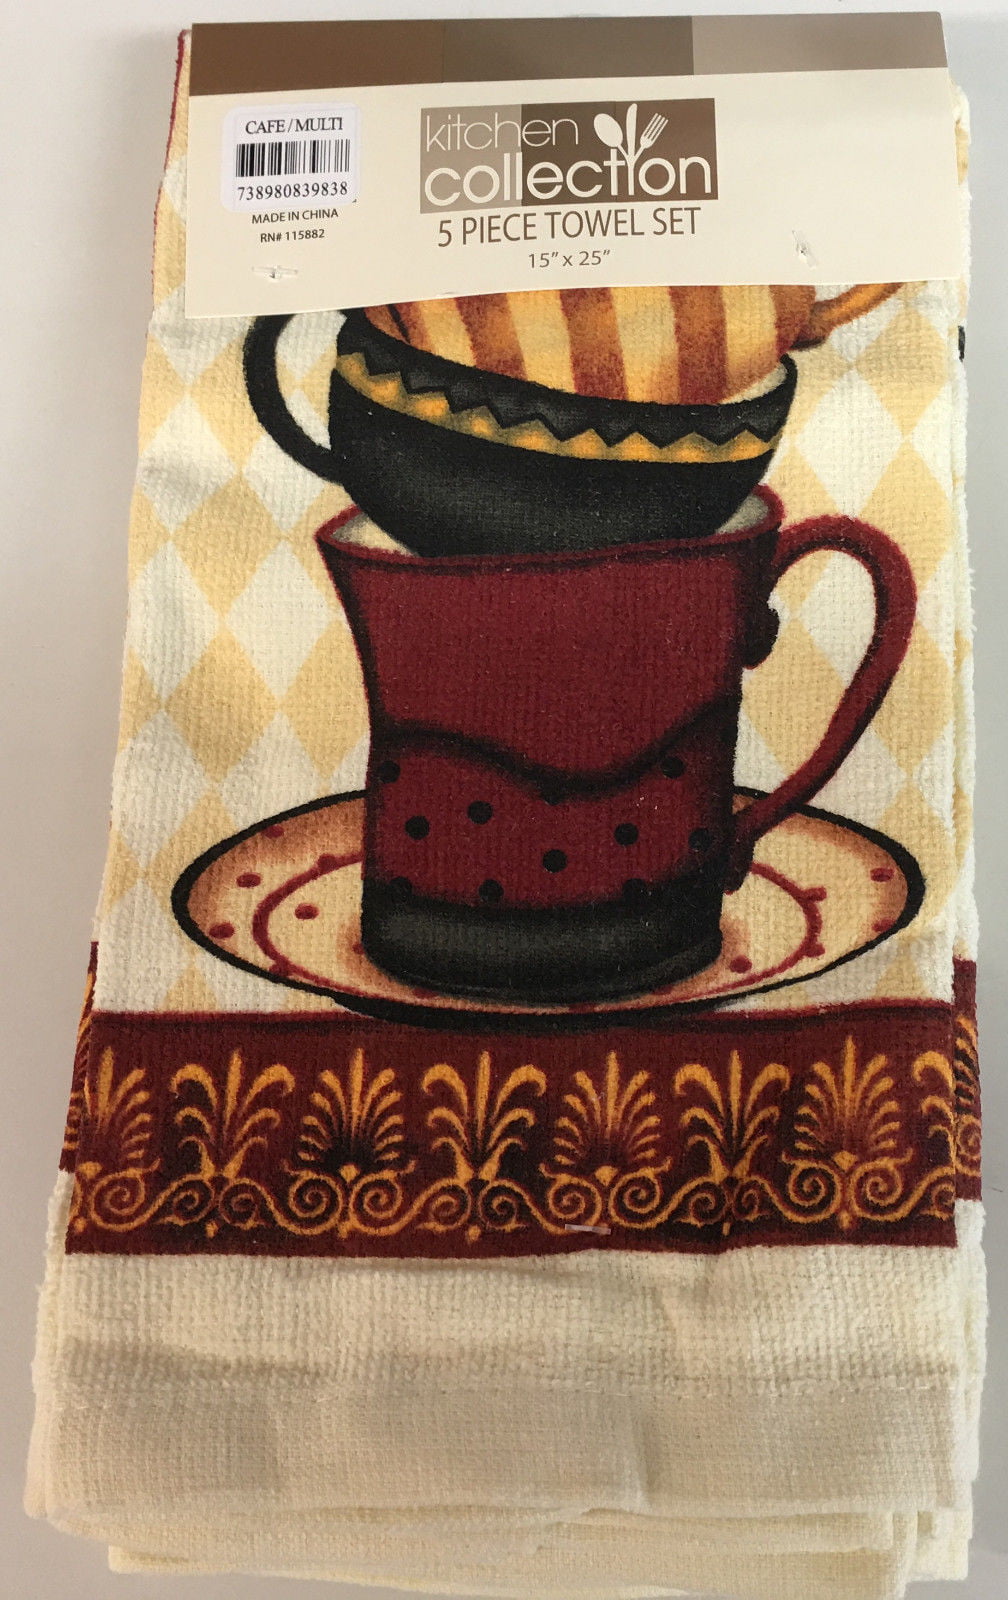 HOT MOCHA COFFEE CUP KC 5 pc SAME PRINTED TERRY KITCHEN TOWELS SET 15" x 25" 